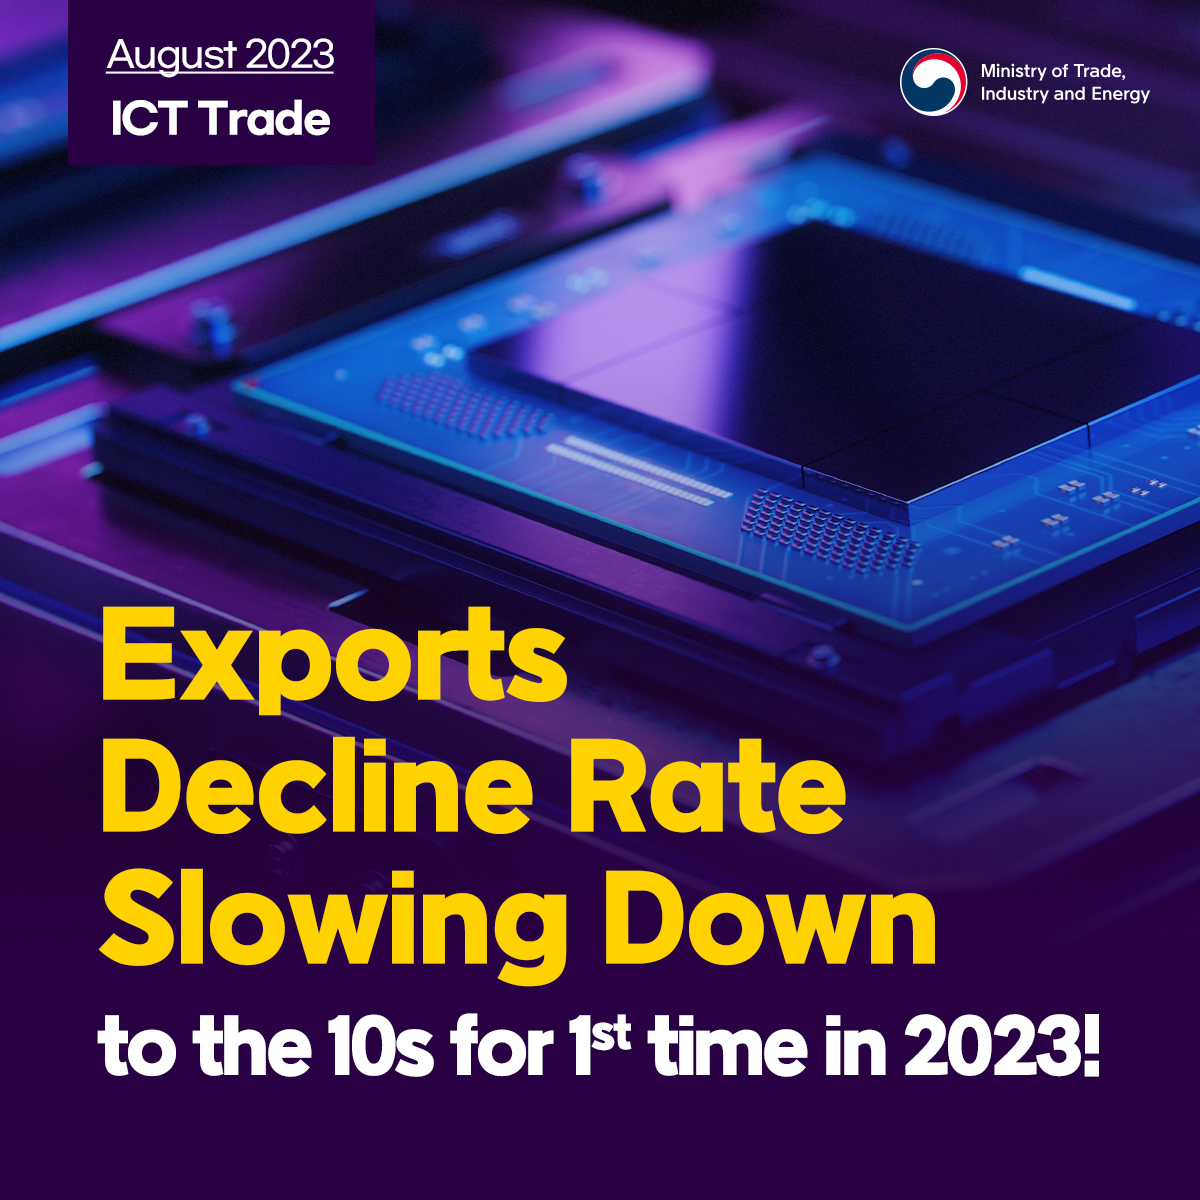 Korea's ICT exports decline rate slowing down!